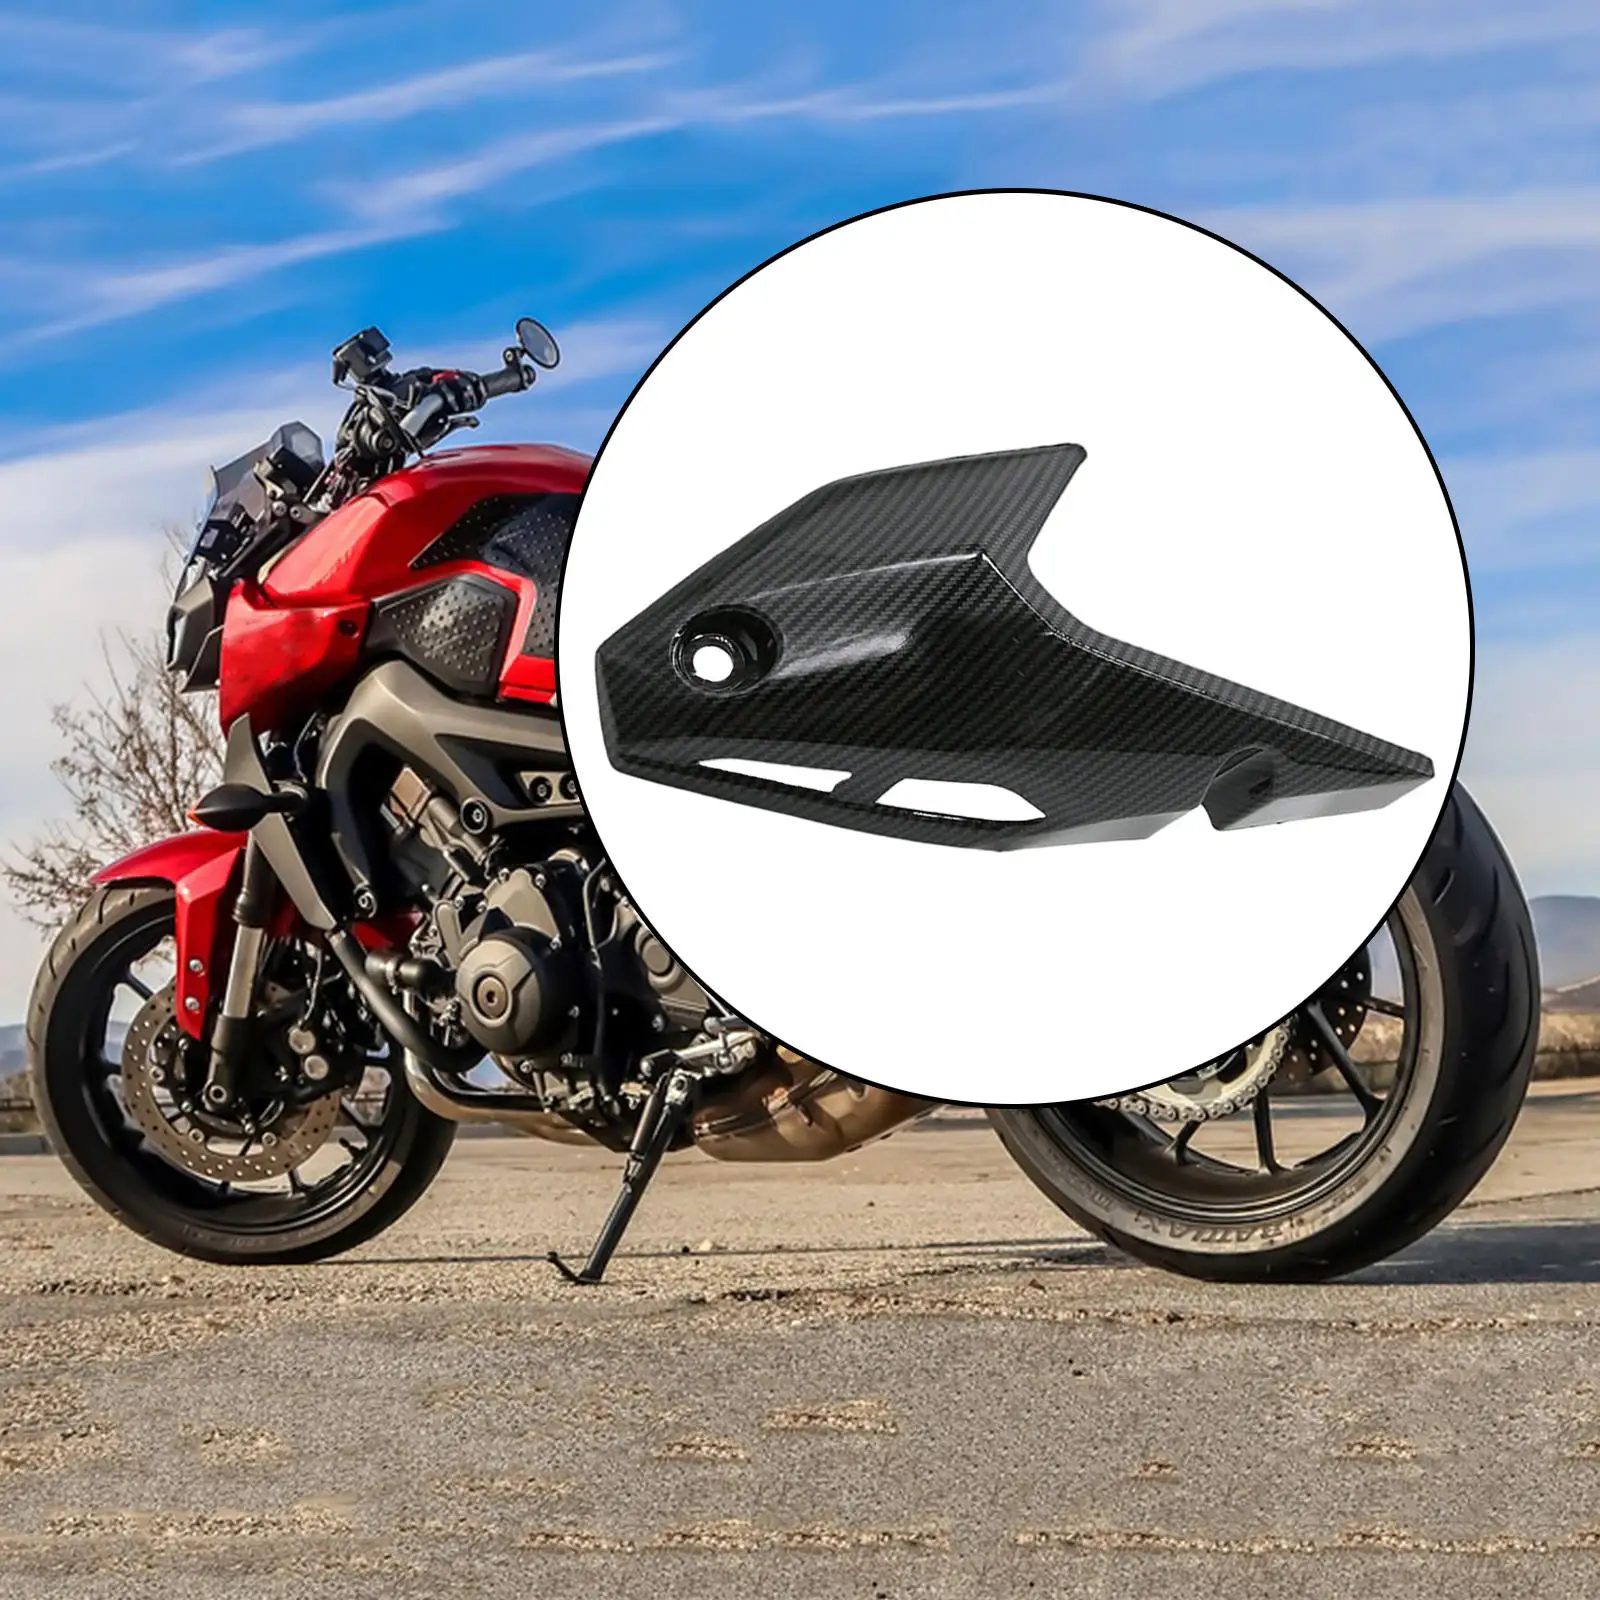 Motorcycle Exhaust Pipe Cover Trim Panel Guard Exhaust Heat Shield, for Honda Adv150 Adv 150